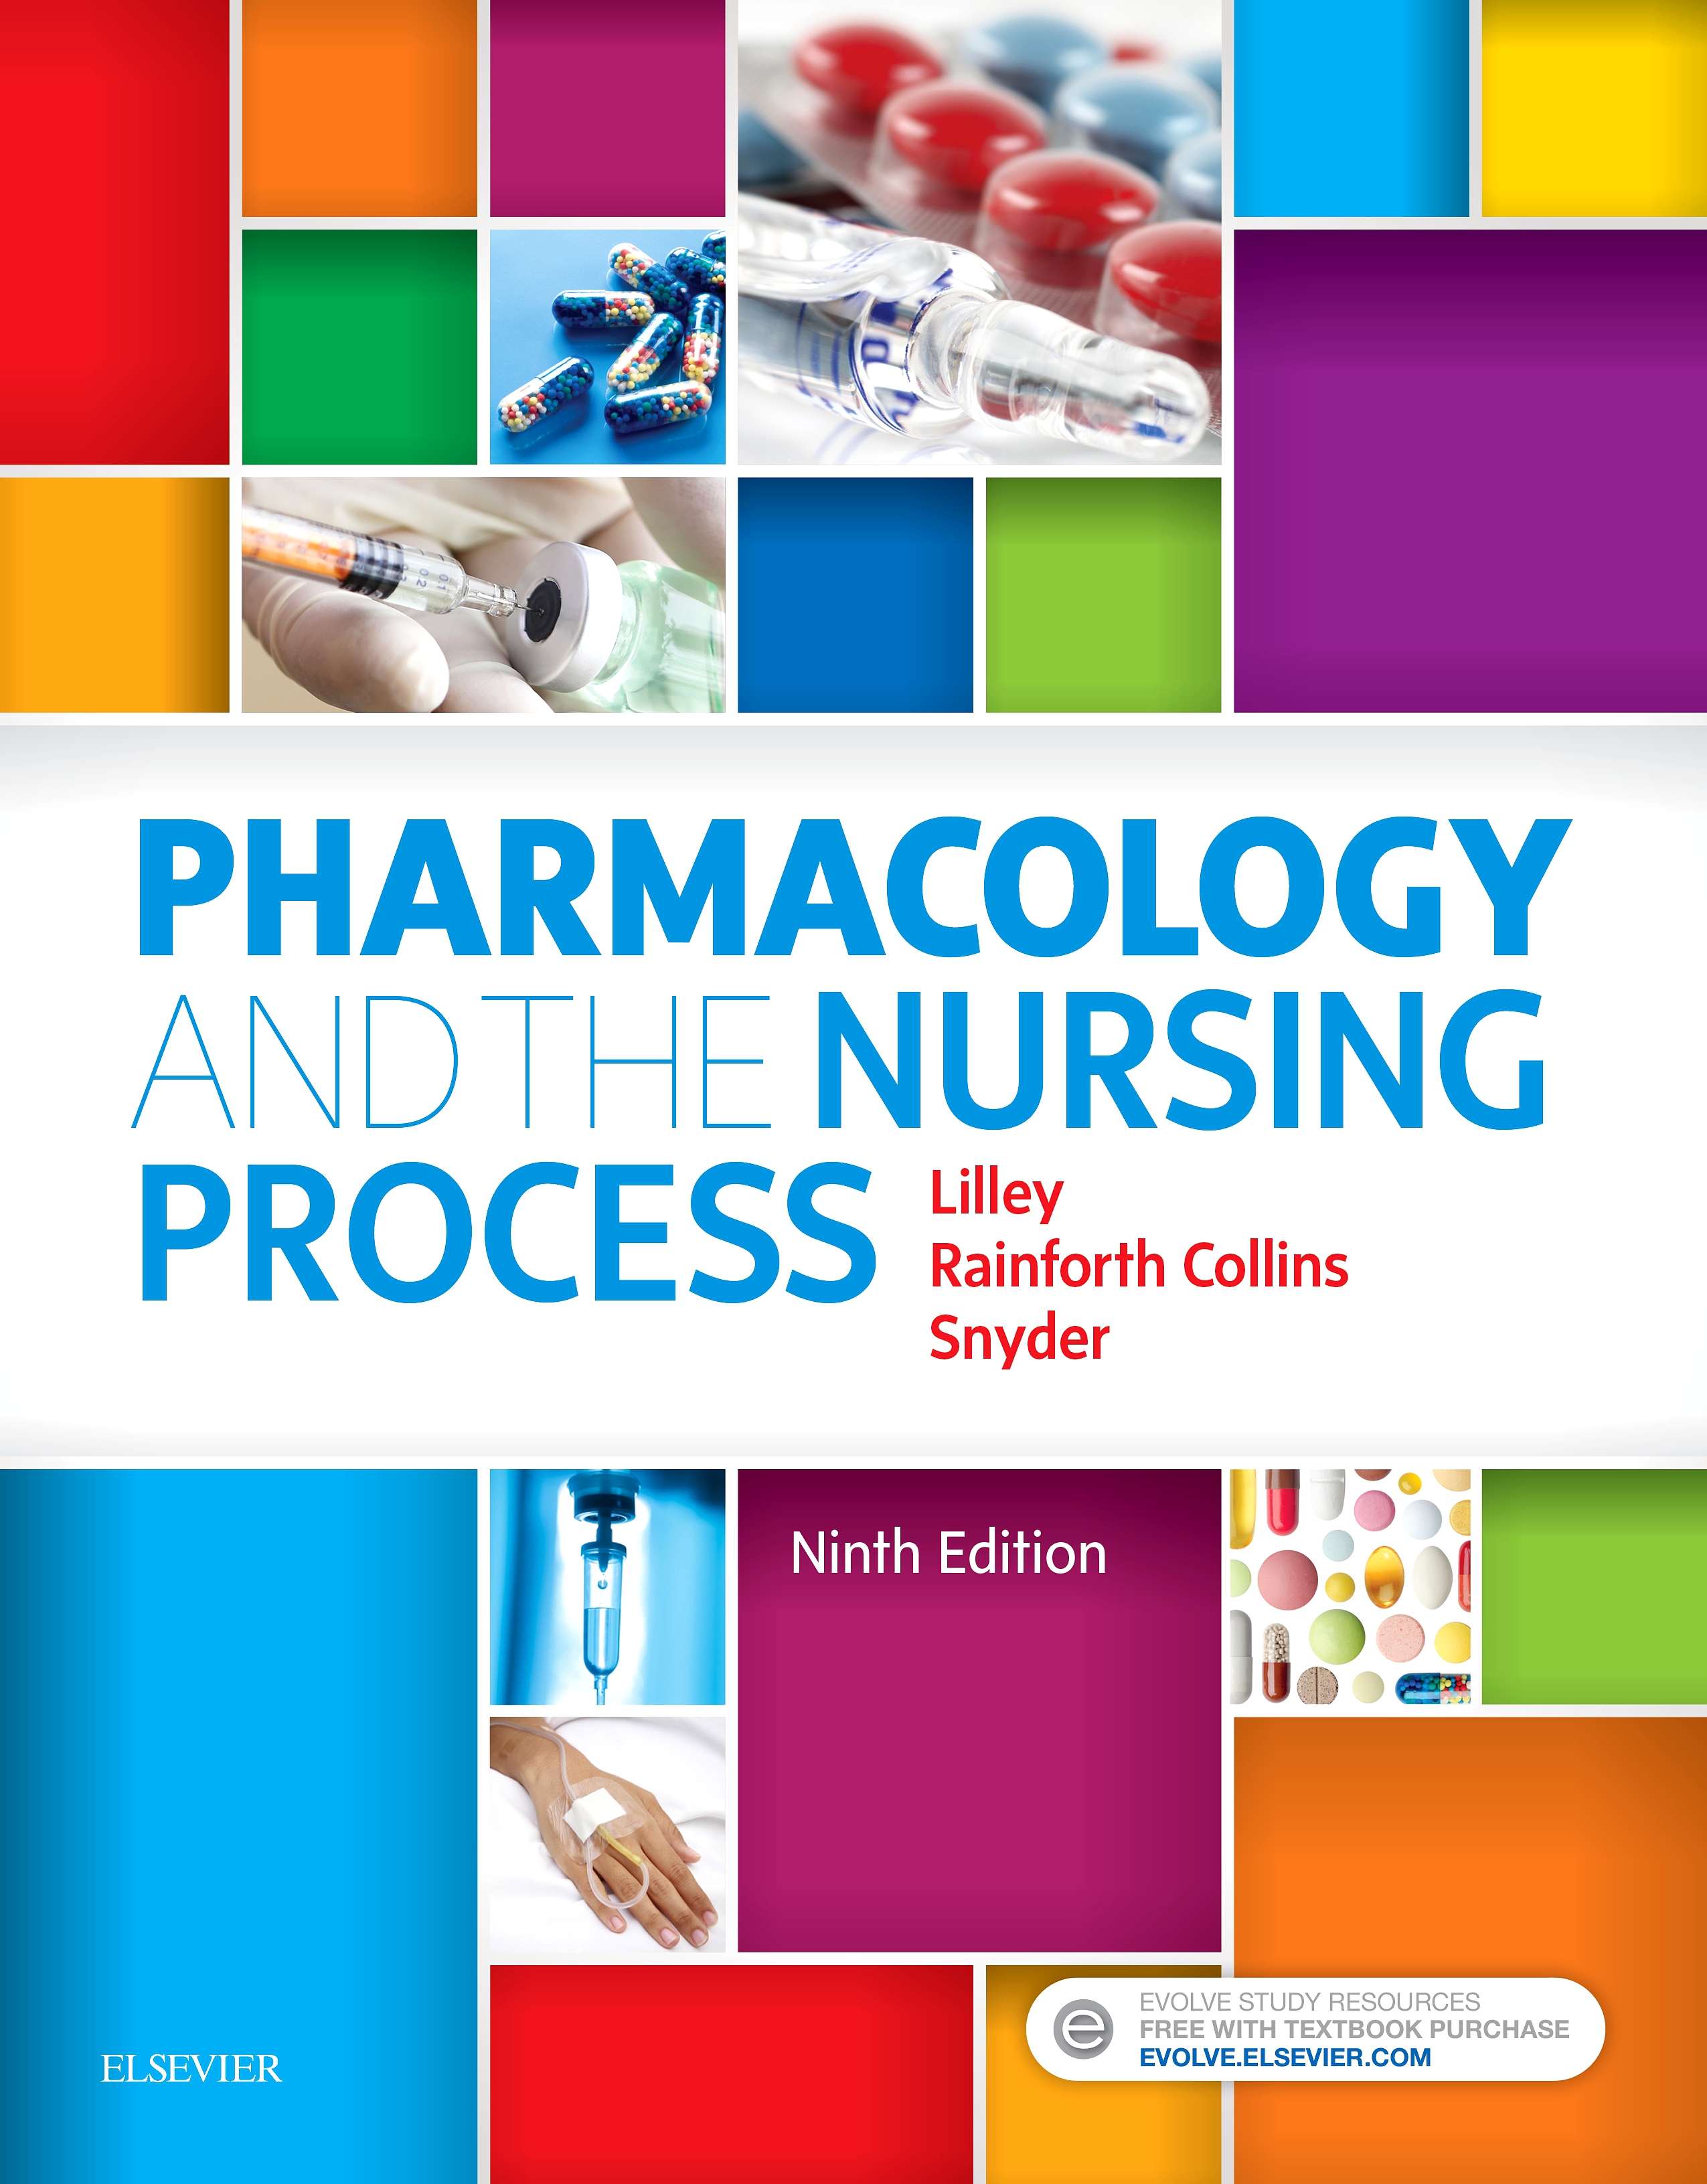 Evolve Resources for Pharmacology and the Nursing Process, 9th Edition